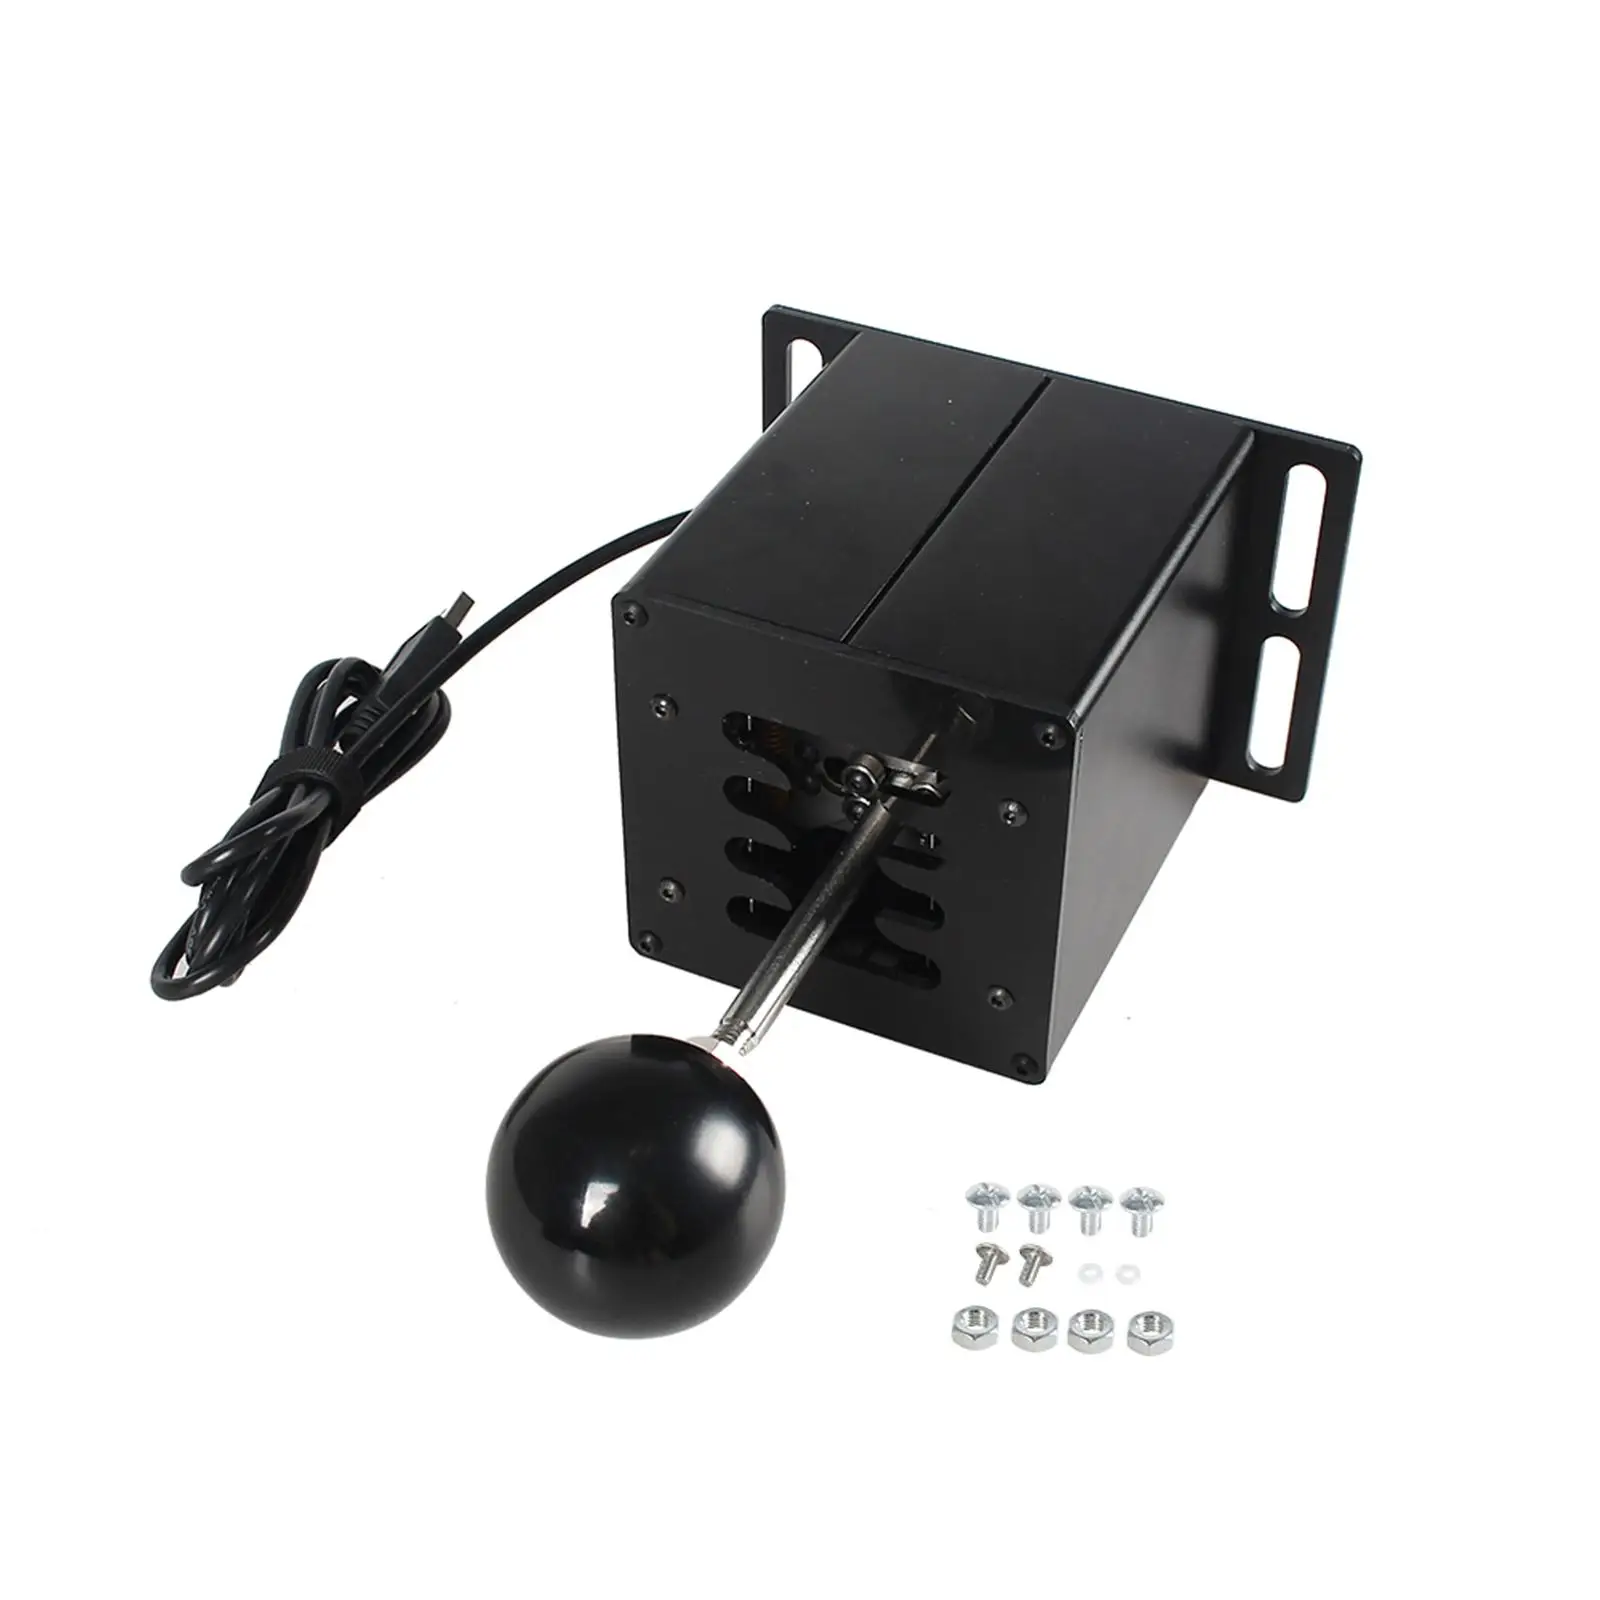 PC USB Simulator Shifter H Gear Shifter Fit for Logitech G29 G27 G25 G920 Sim Racing Games for Lfs for Forza 4 for Ets